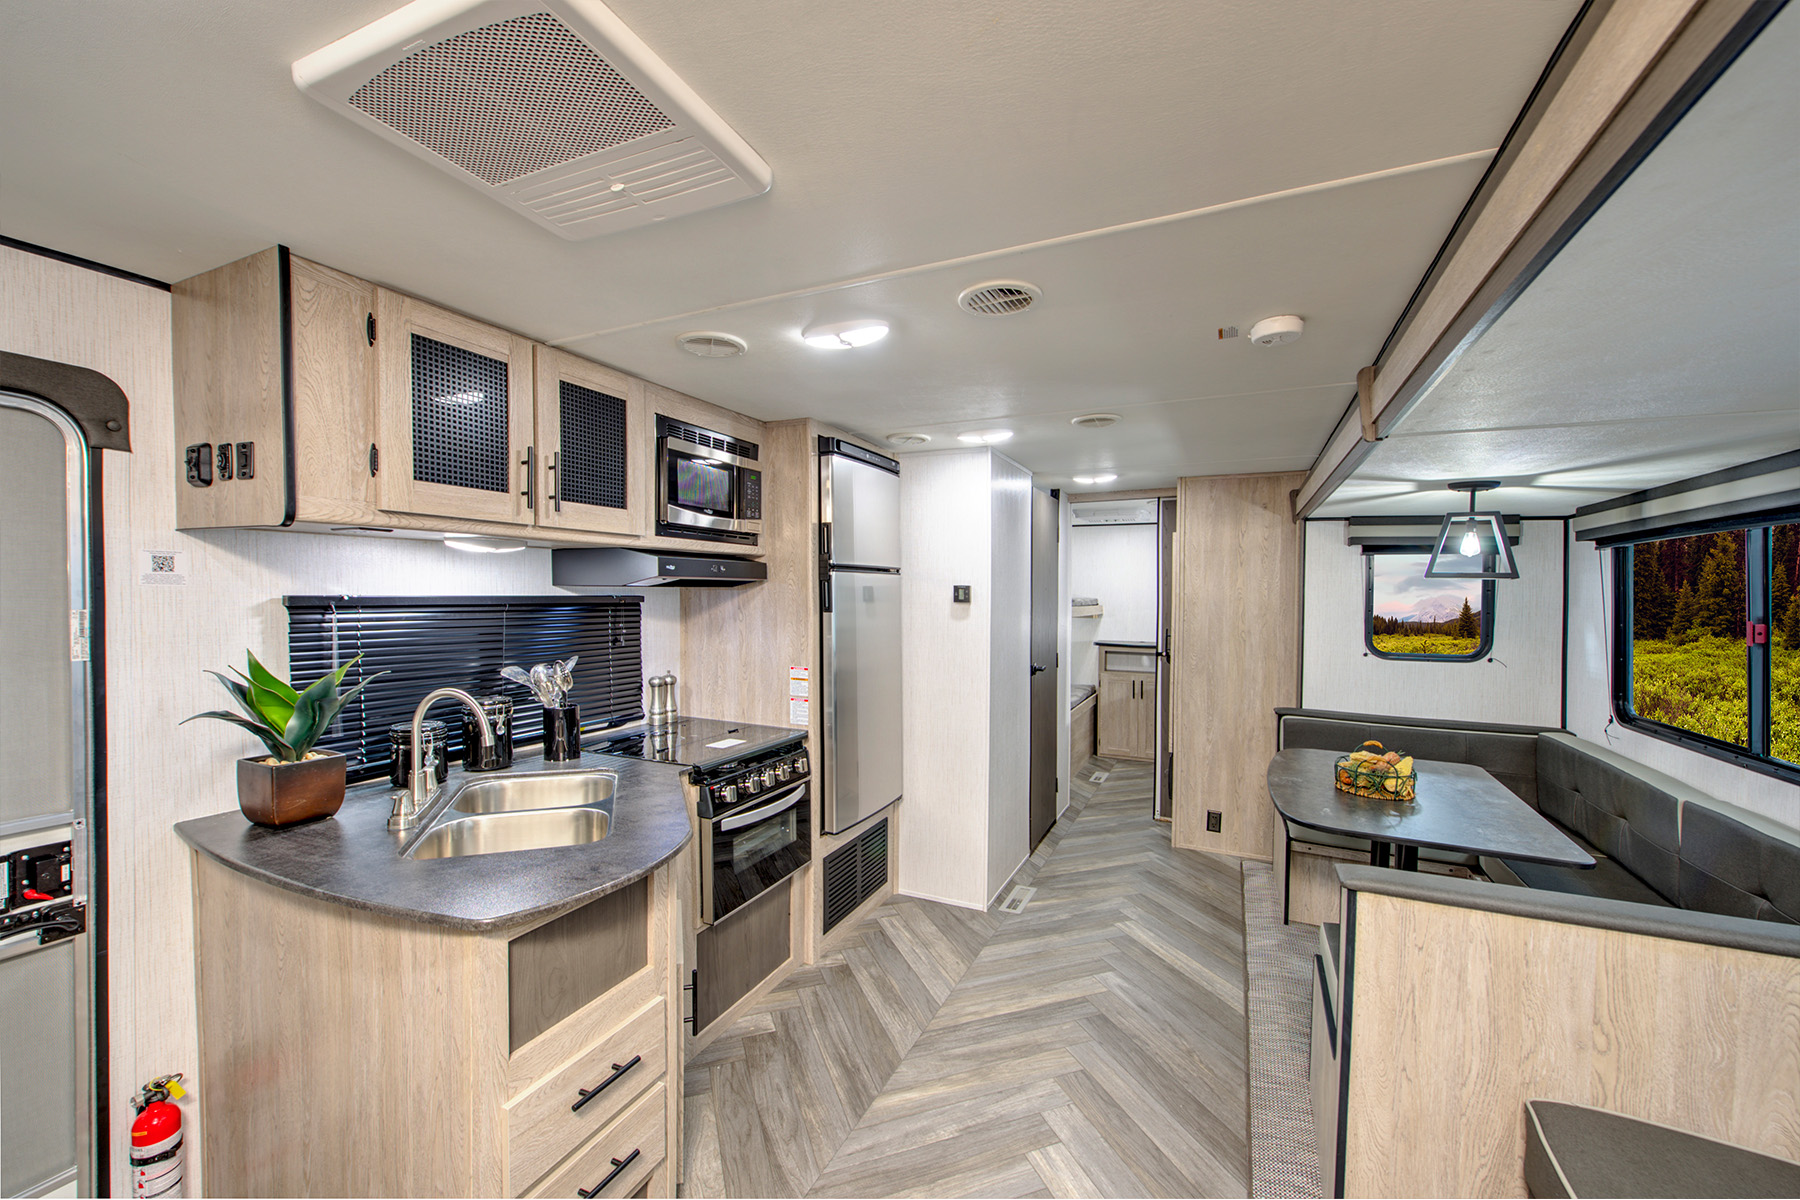 2023 HEARTLAND Prowler - 300 SBH for sale in the Pompano Beach, FL area. Get the best drive out price on 2023 HEARTLAND Prowler - 300 SBH and compare.